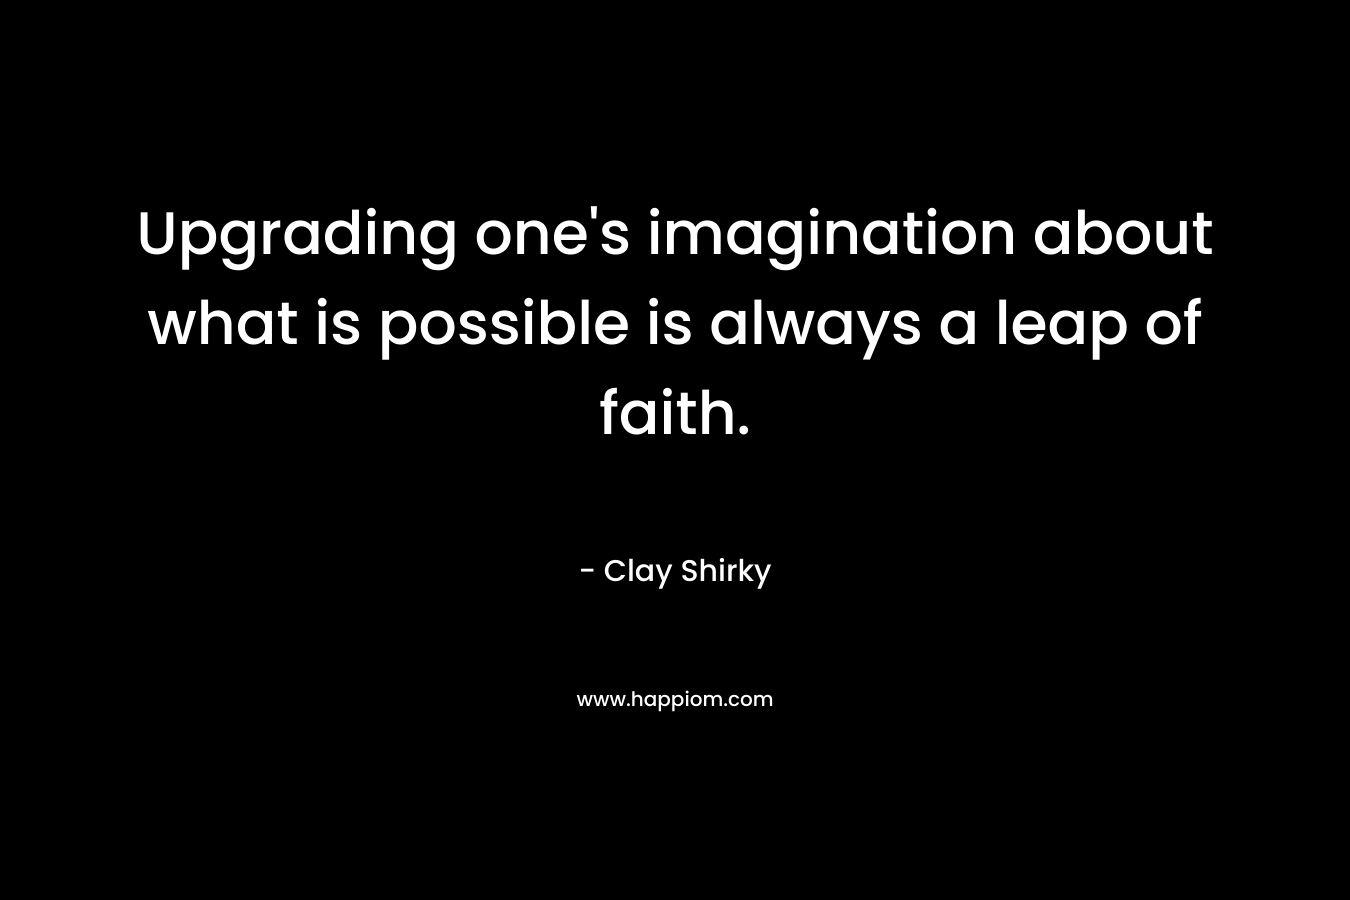 Upgrading one's imagination about what is possible is always a leap of faith.